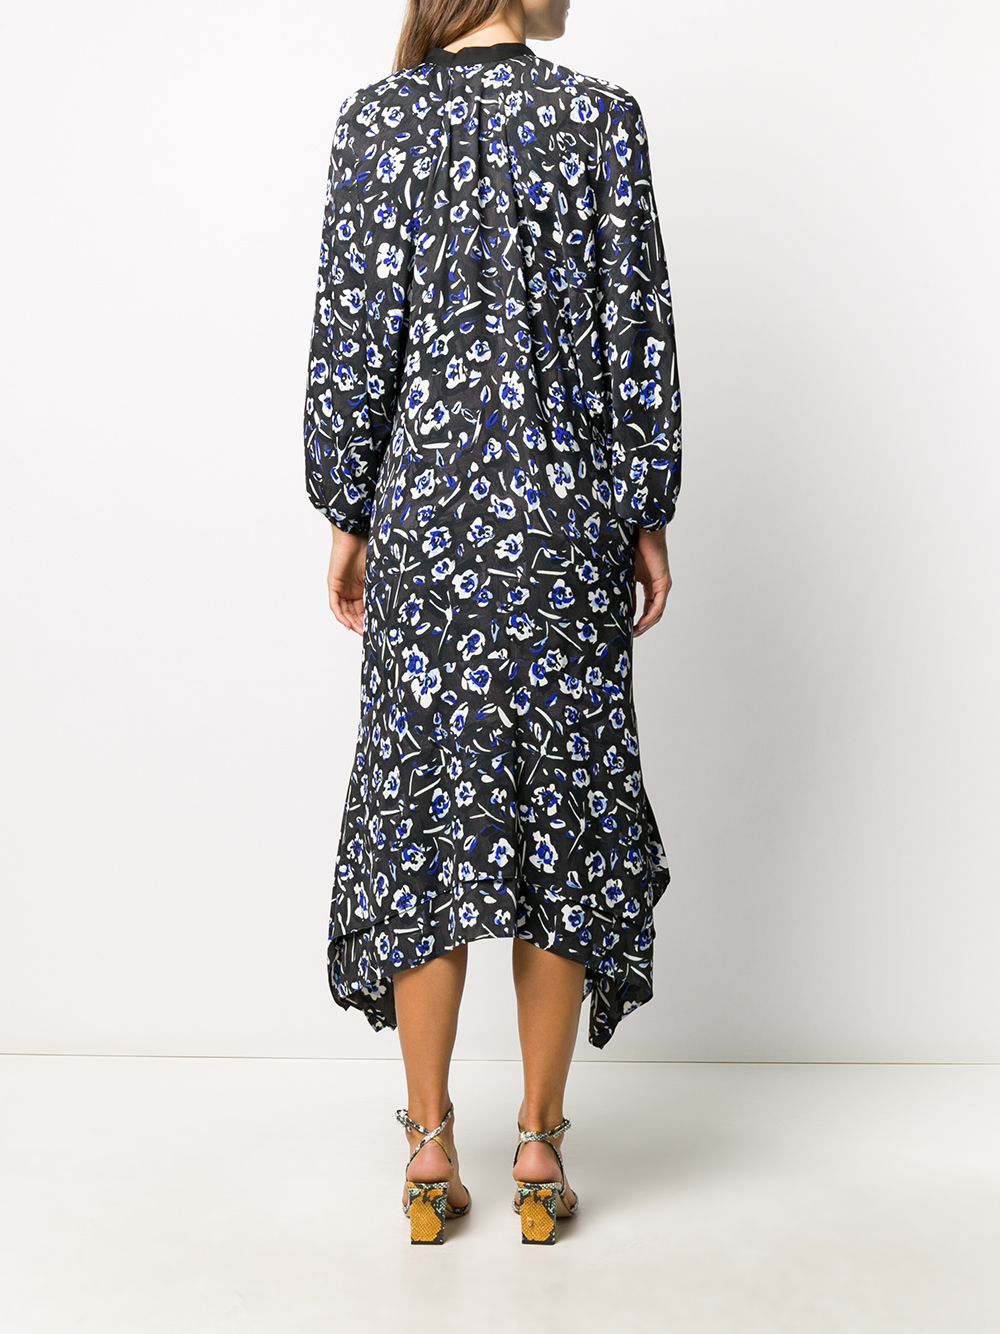 Shop Tory Burch handkerchief-hem floral dress with Express Delivery ...